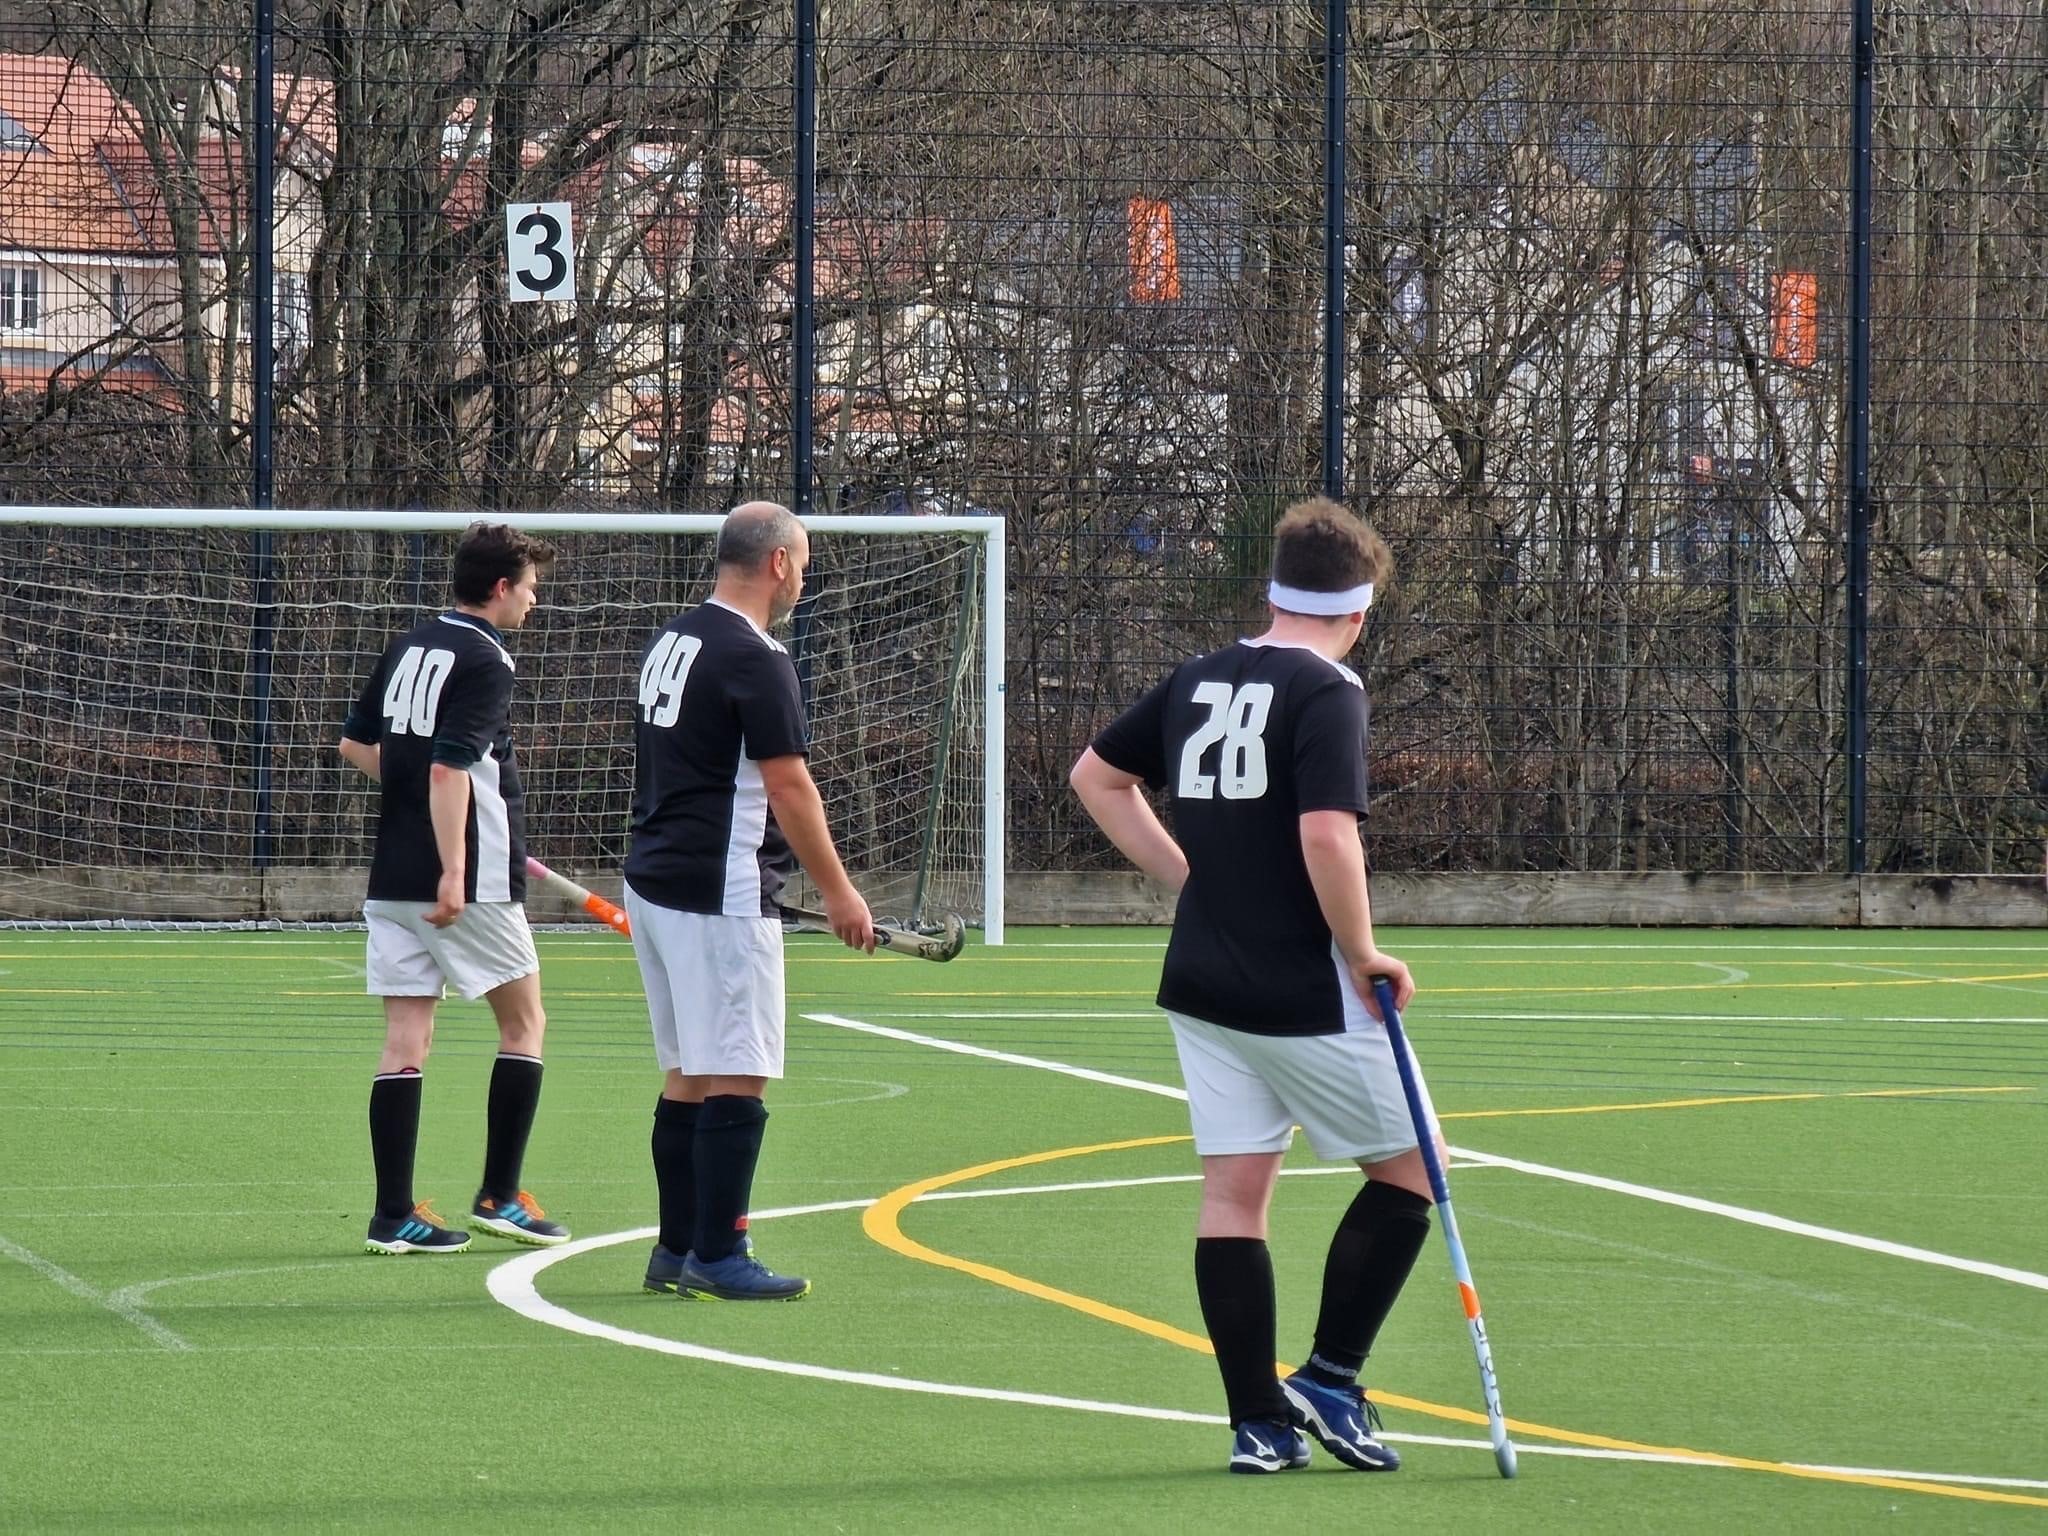 Waiting for a penalty corner during Saturdays match at Hermitage Academy